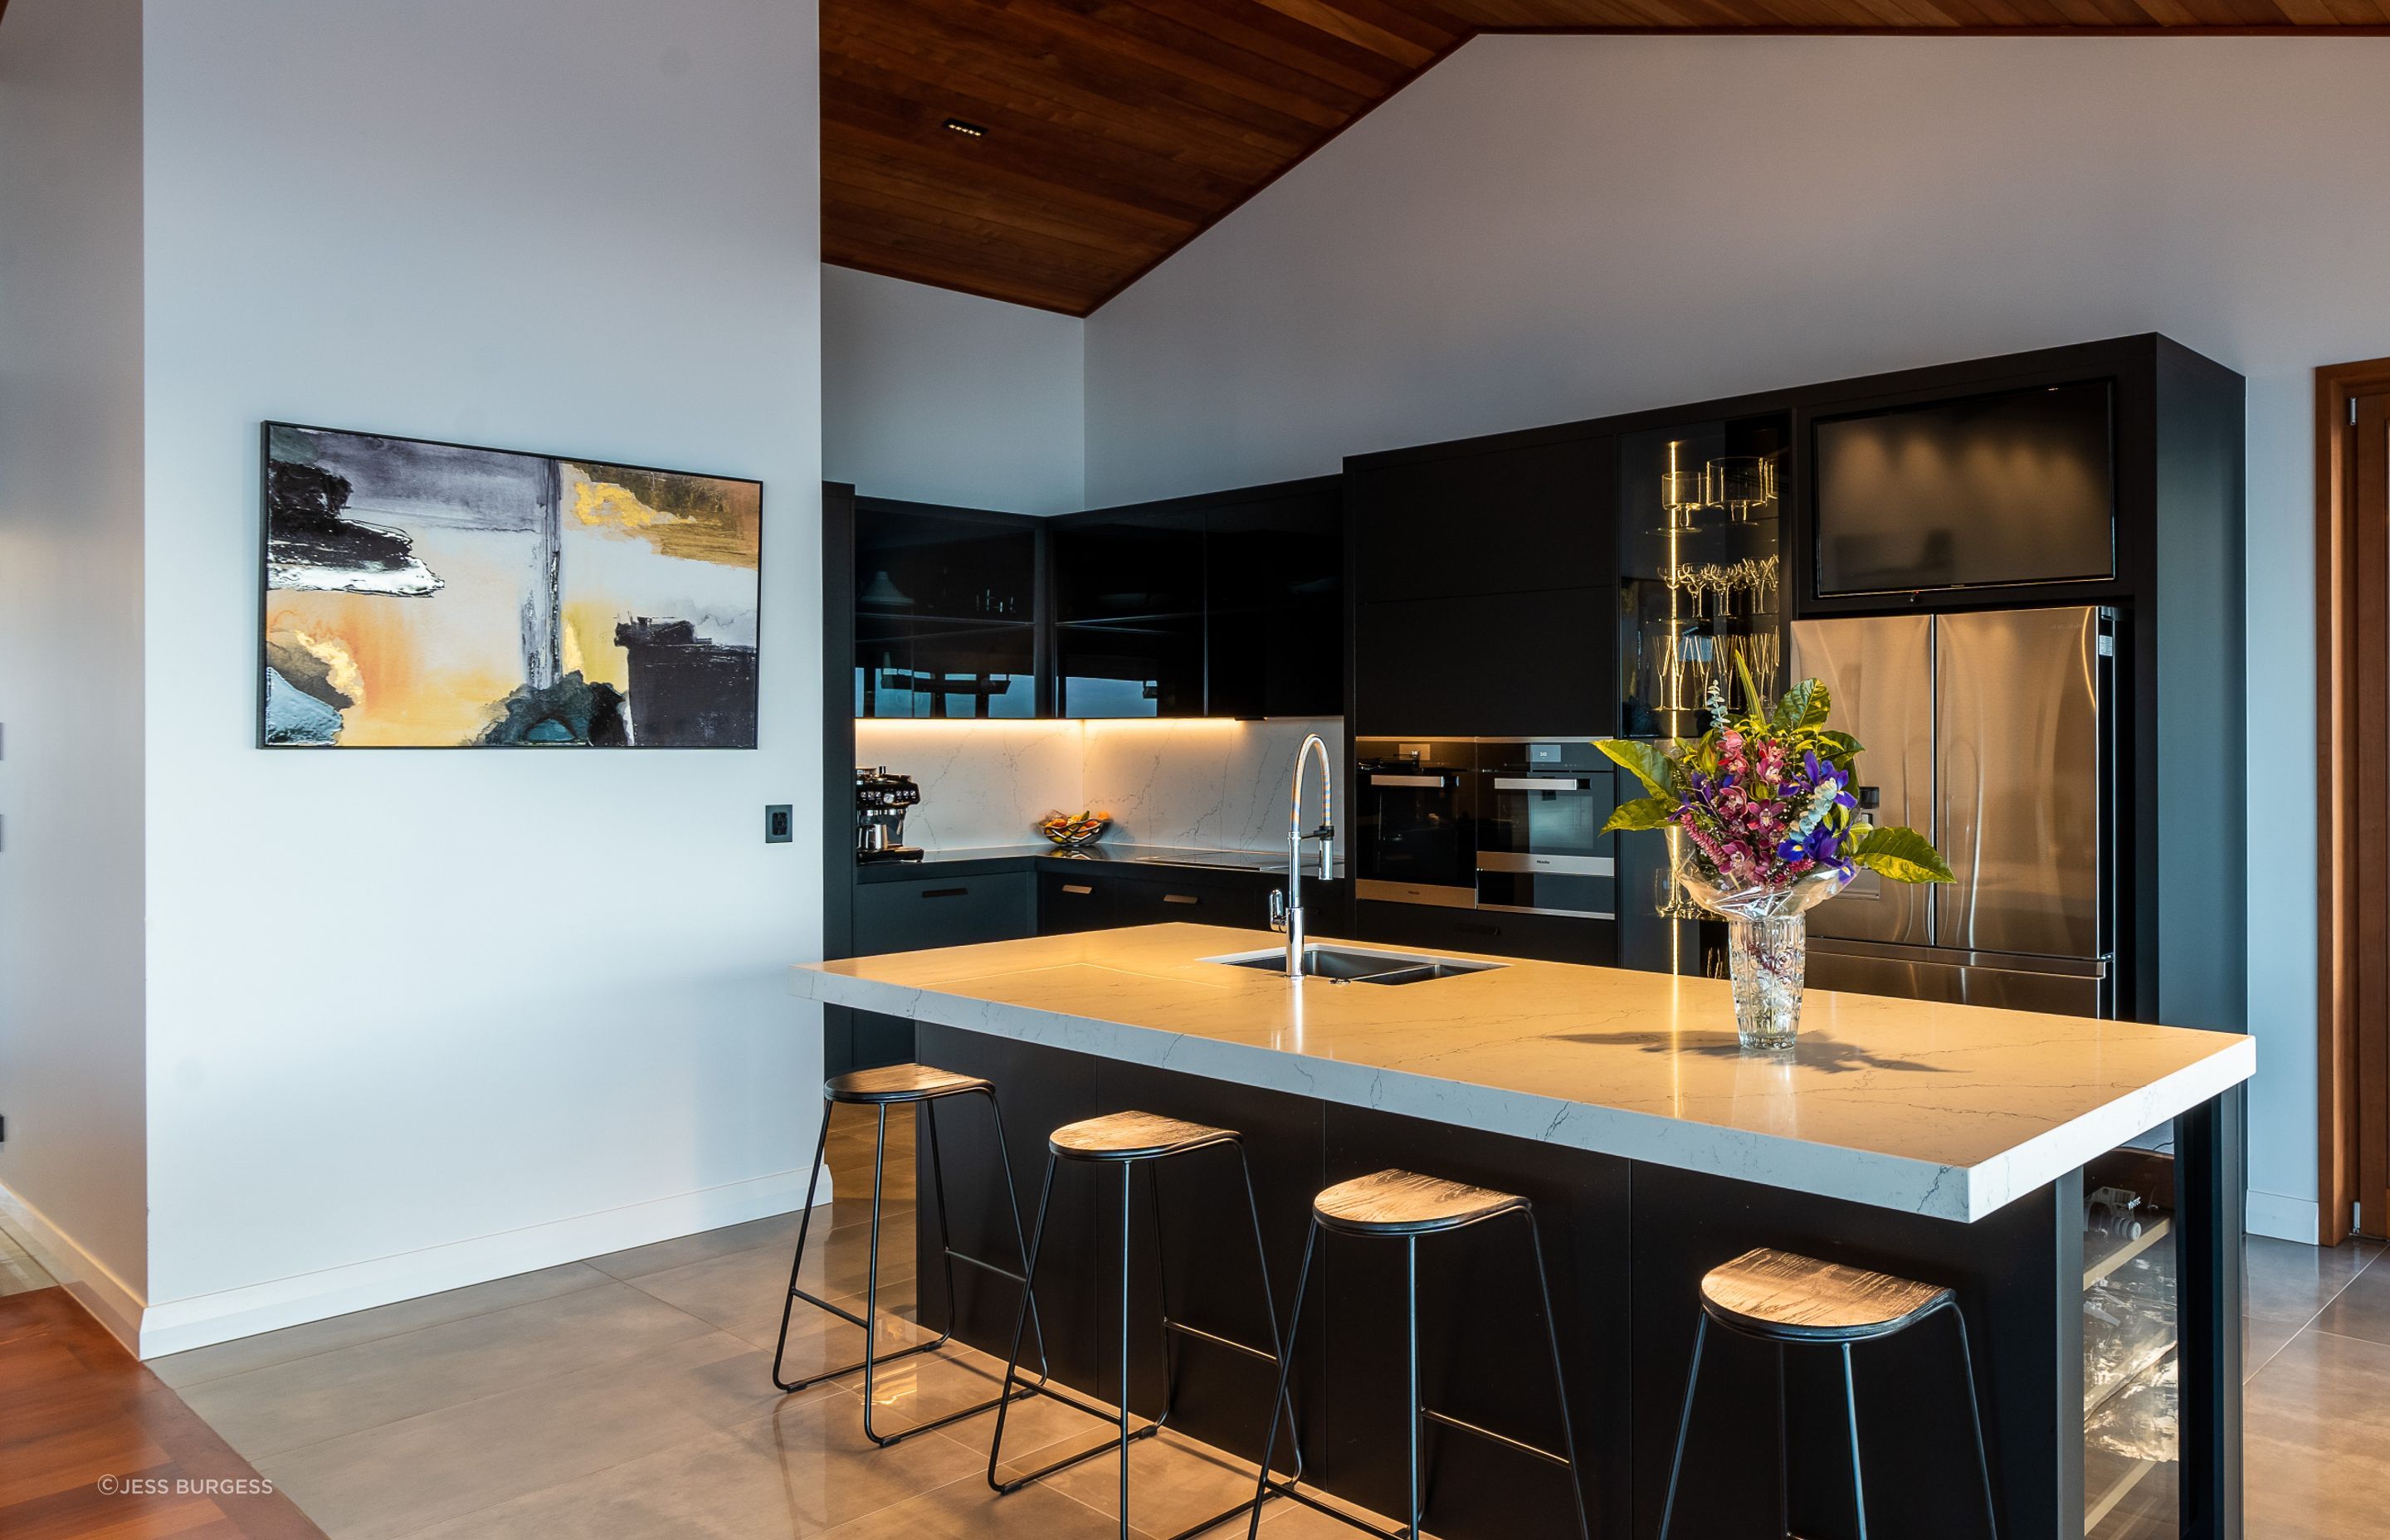 The ovens in the kitchen are by Miele and the fridge is by Samsung. With a glassware display cabinet, two dishwashers and a Vintec wine fridge, it's a house made for entertaining.